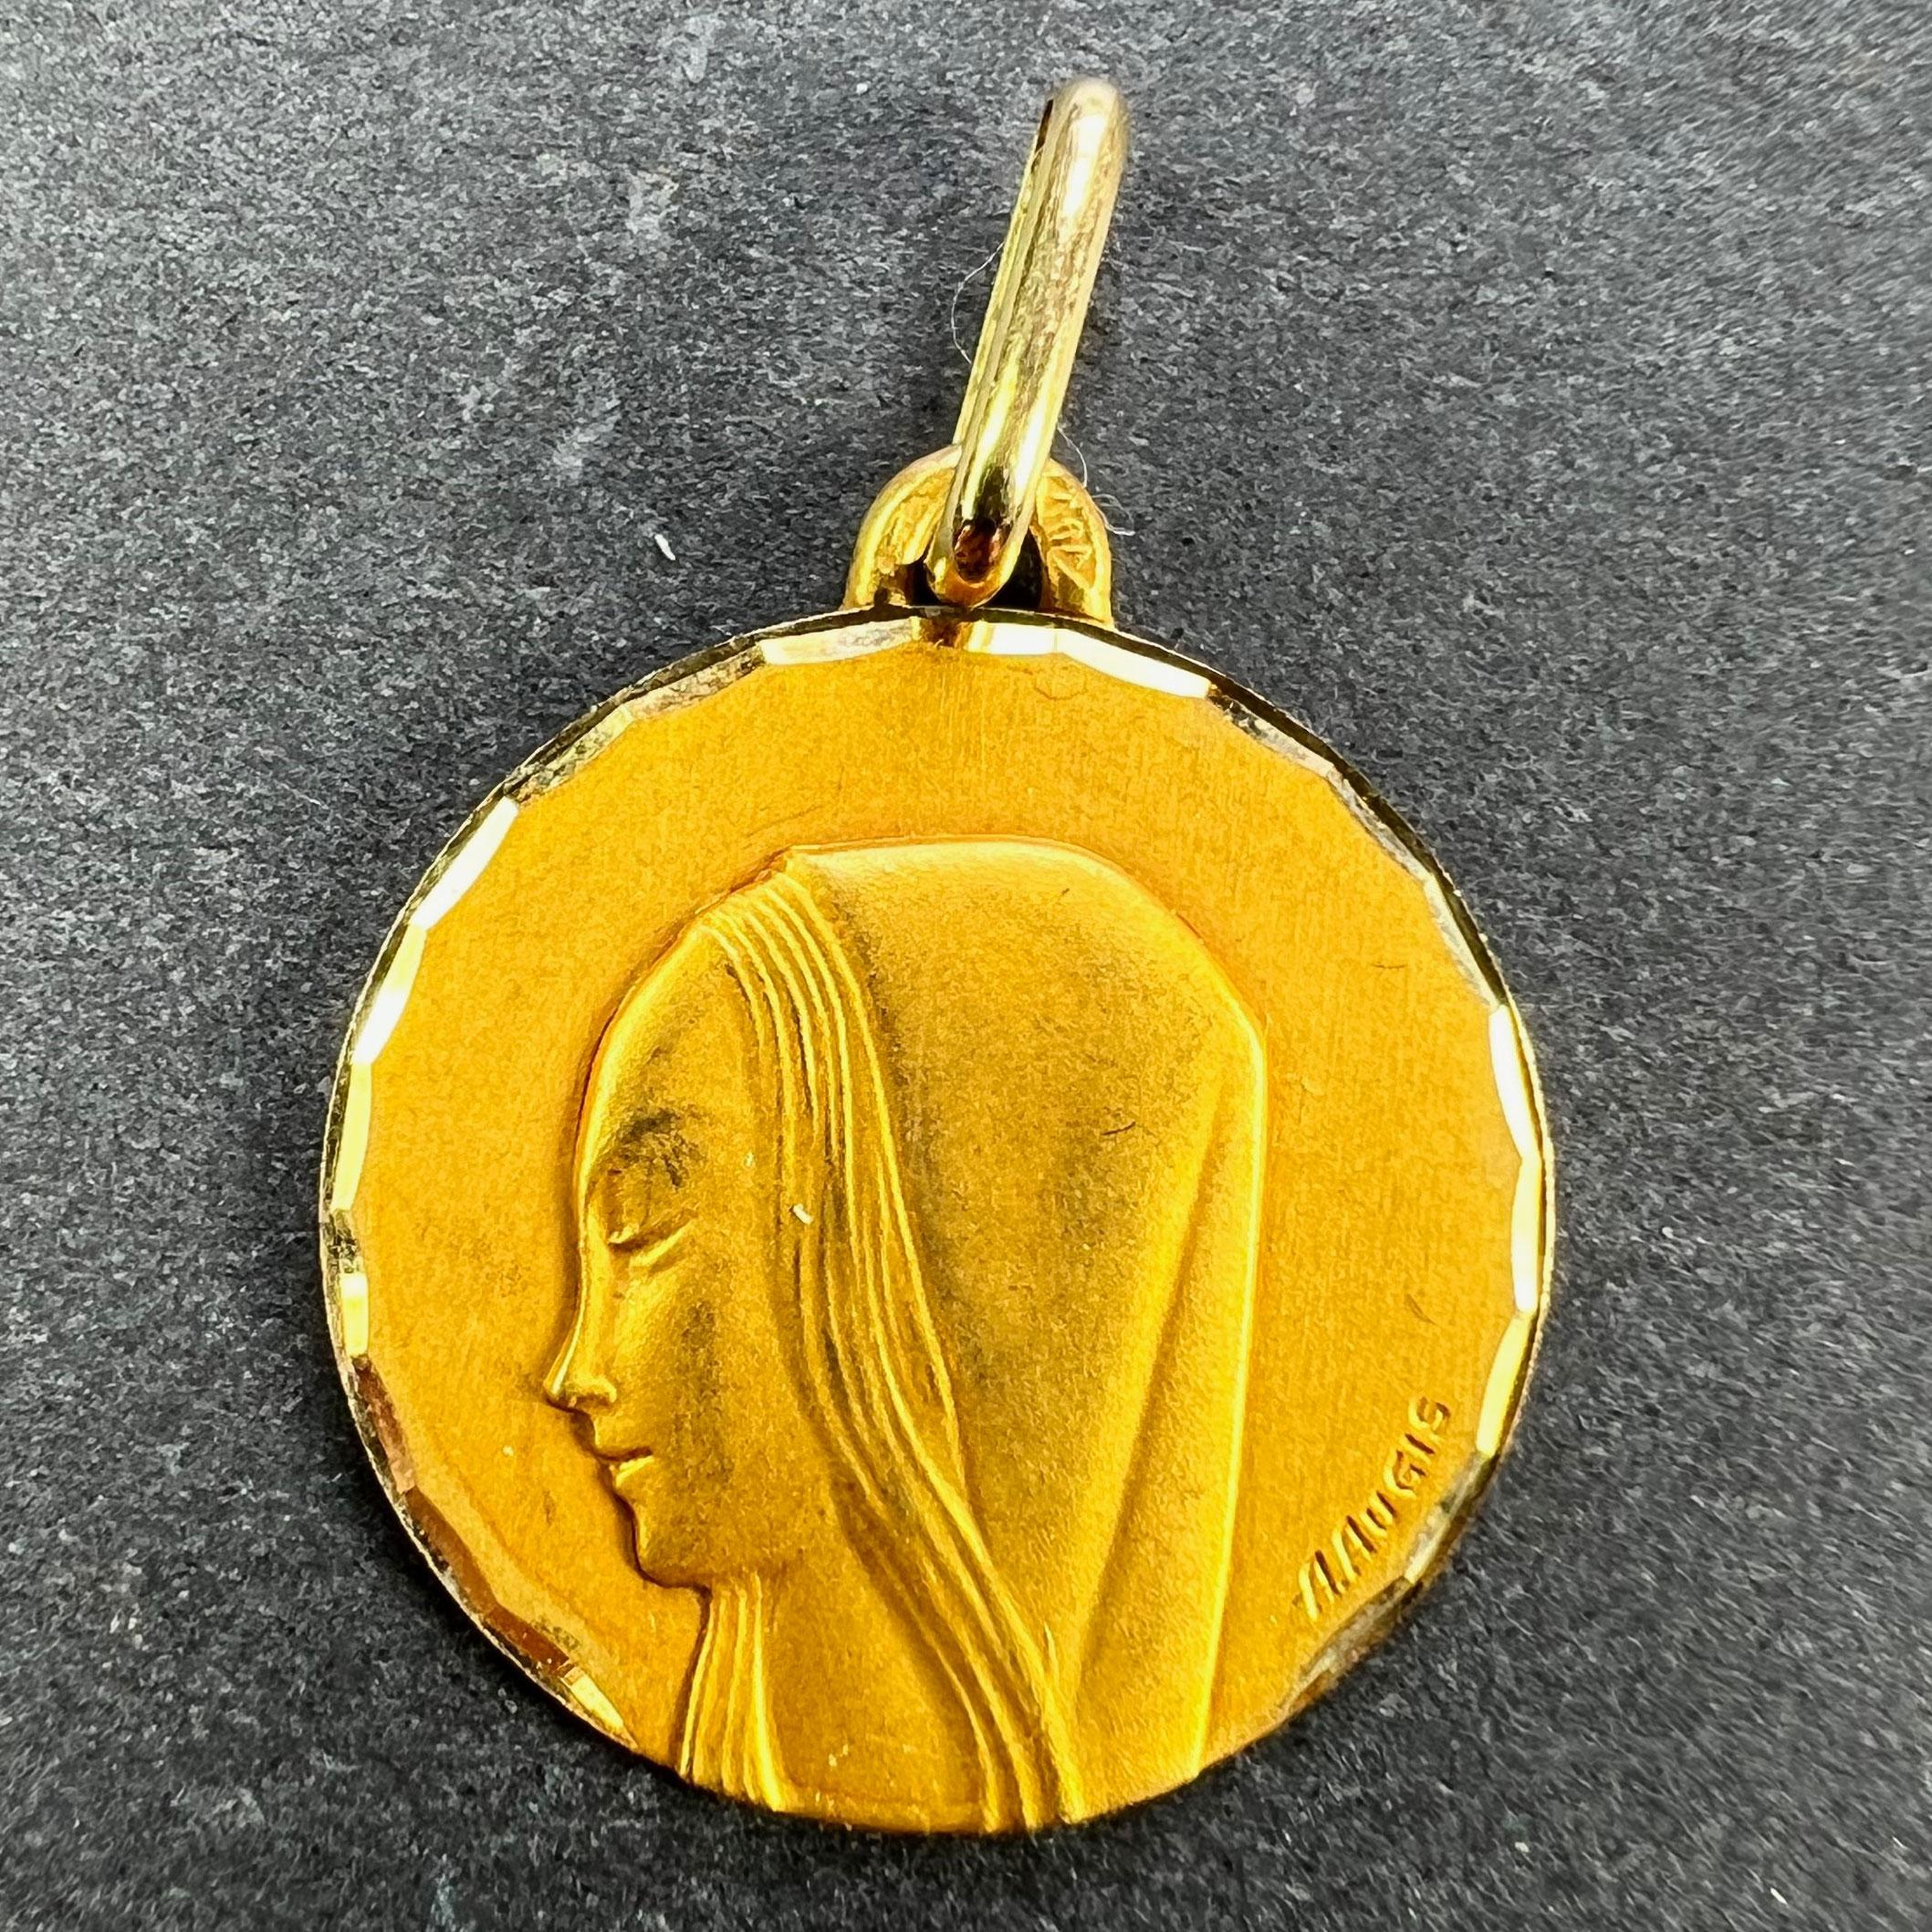 A French 18 karat (18K) yellow gold pendant designed as a round medal depicting the Virgin Mary within a faceted scalloped frame. Signed A.Augis. Marked with an A for Augis to the reverse of the pendant loop. Stamped with the eagle’s head for French